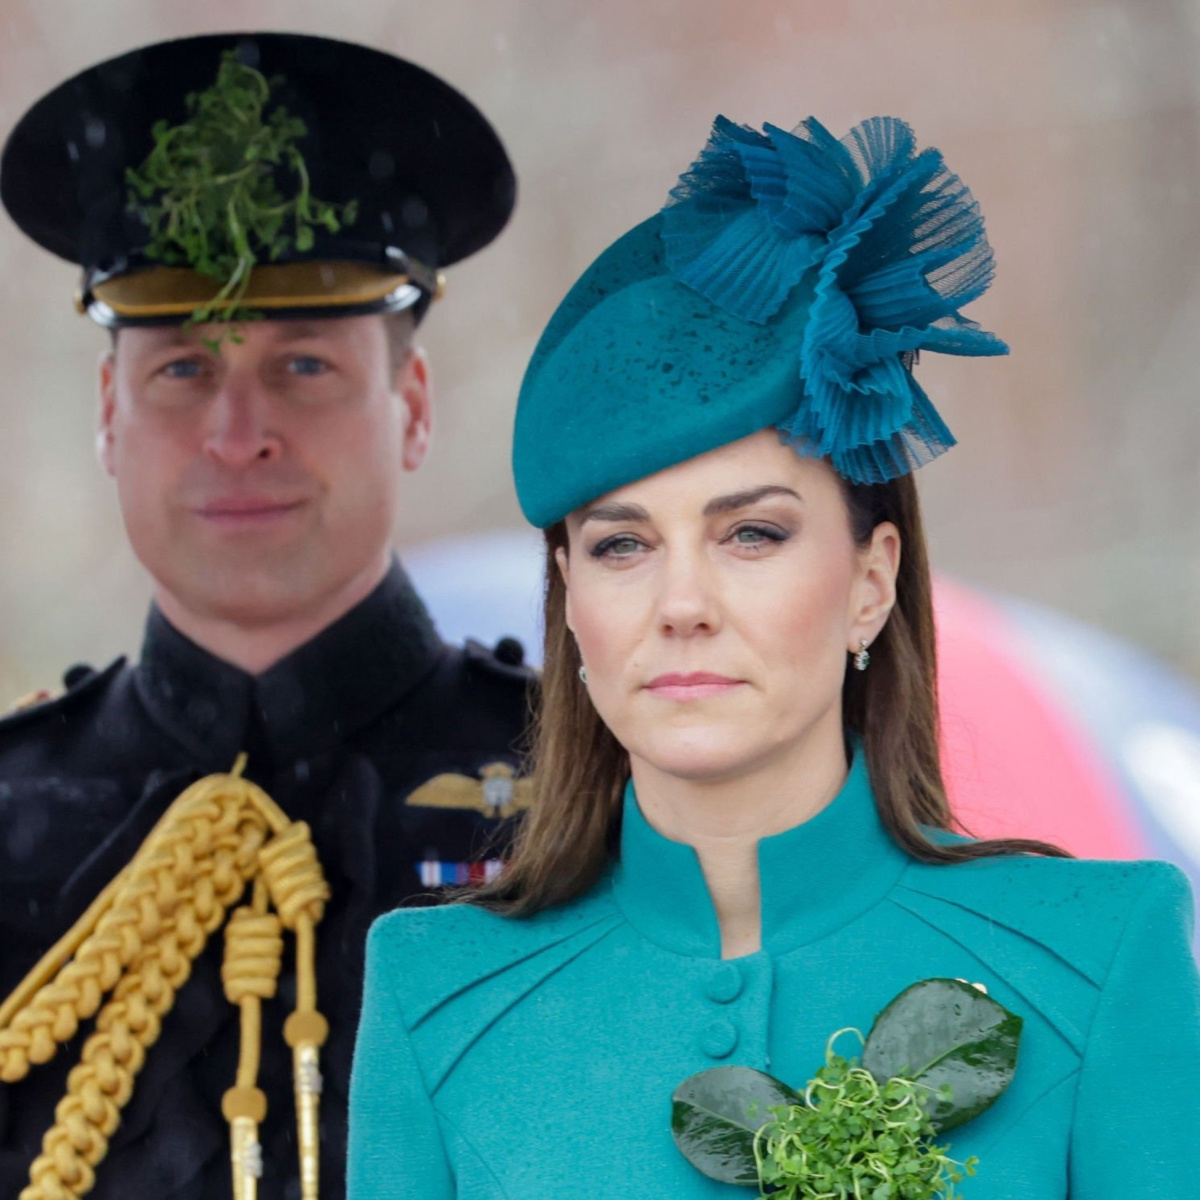 prince william royal attire blue hat suit kate middleton teal hat matching long-sleeved top